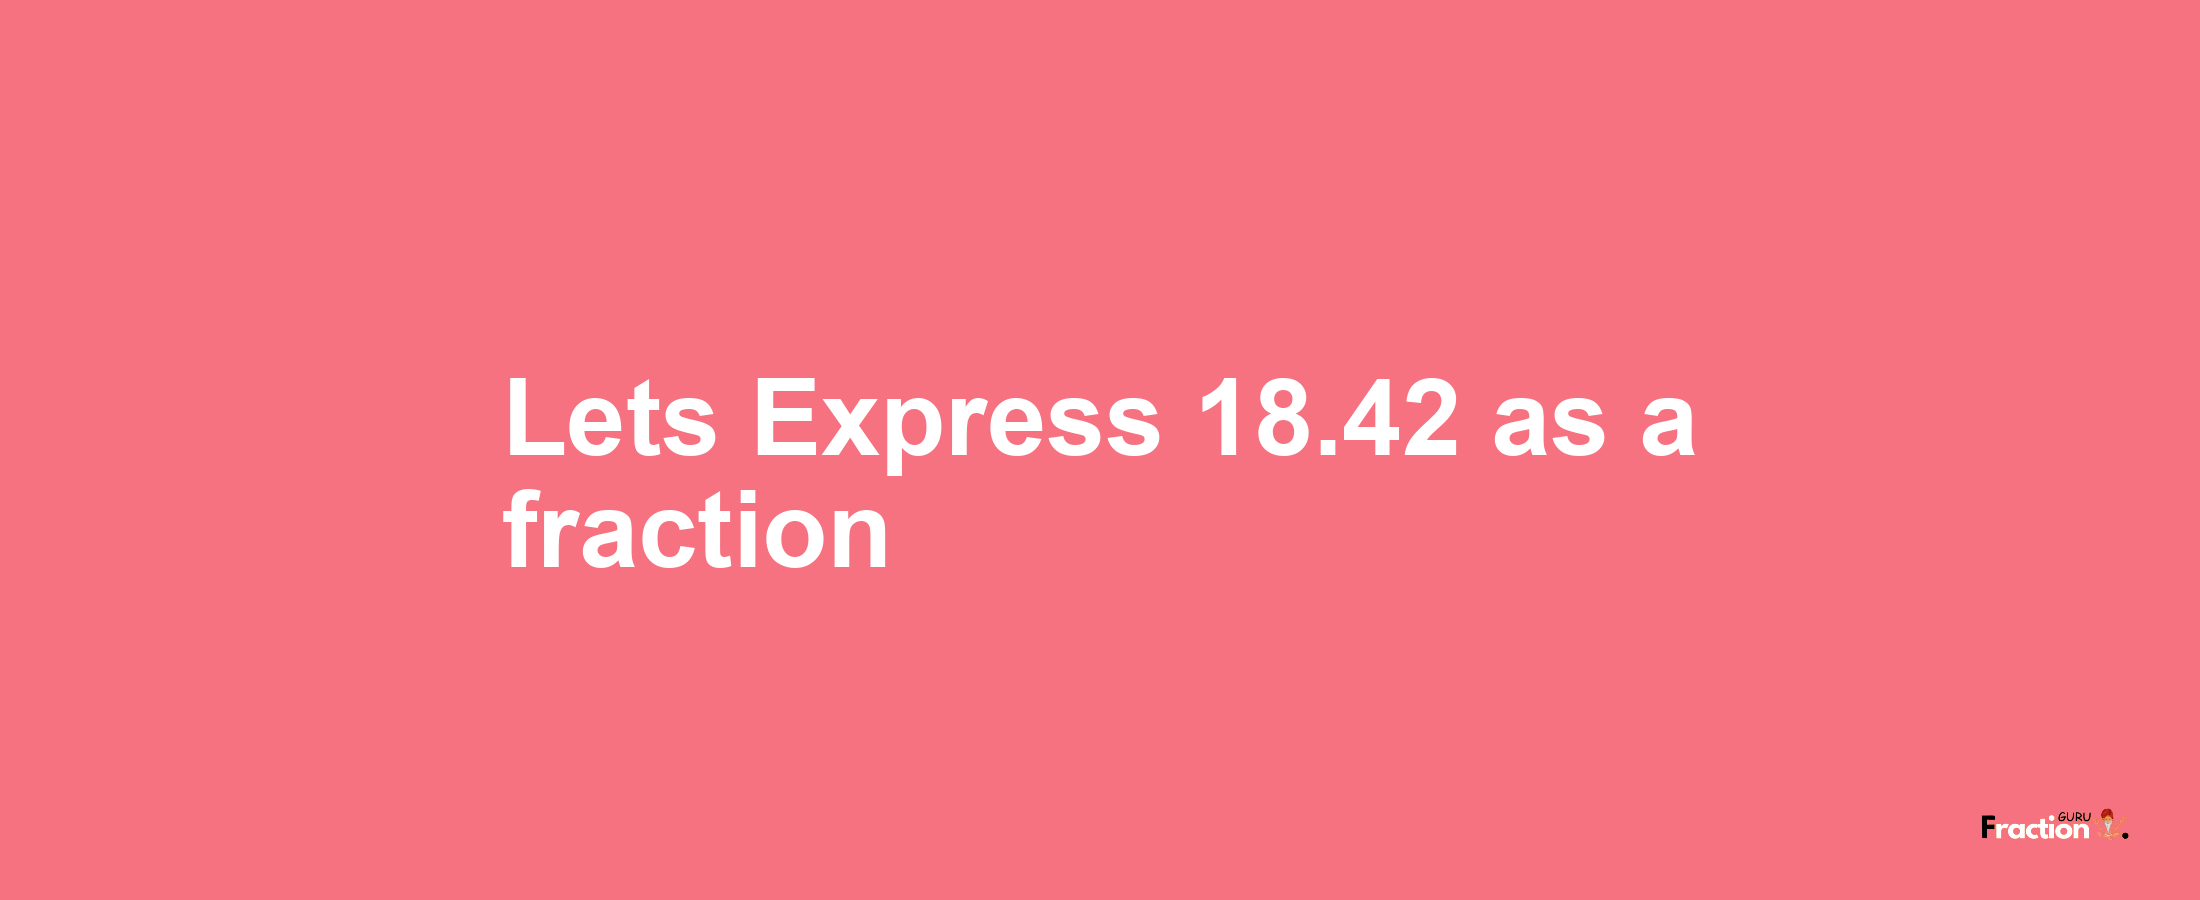 Lets Express 18.42 as afraction